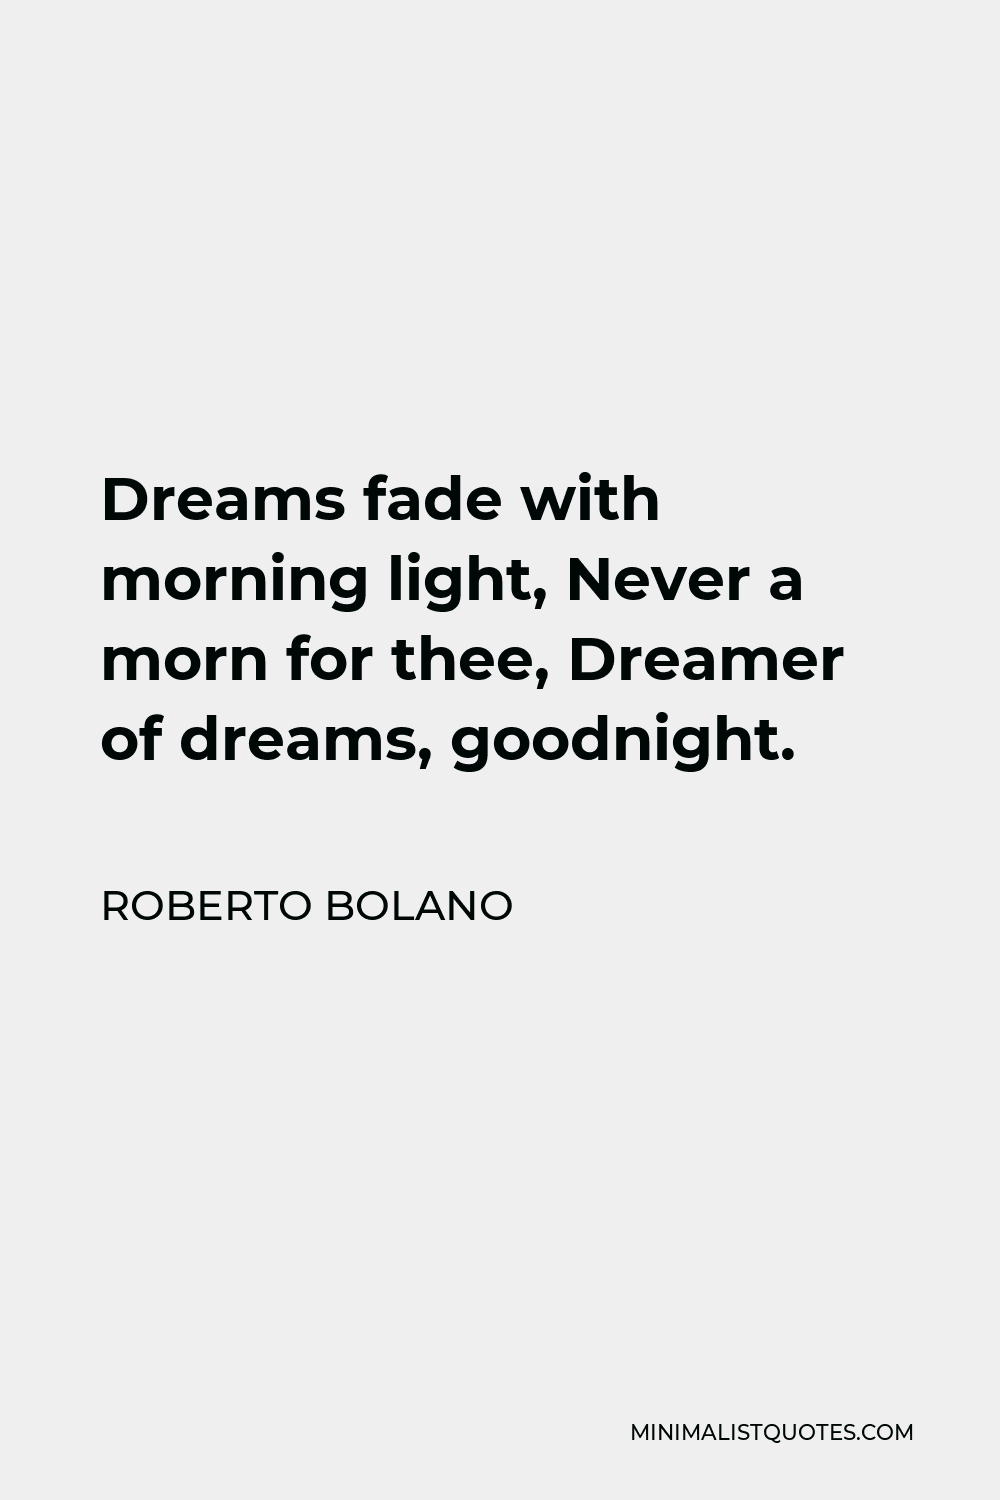 Roberto Bolano Quote - Dreams fade with morning light, Never a morn for thee, Dreamer of dreams, goodnight.